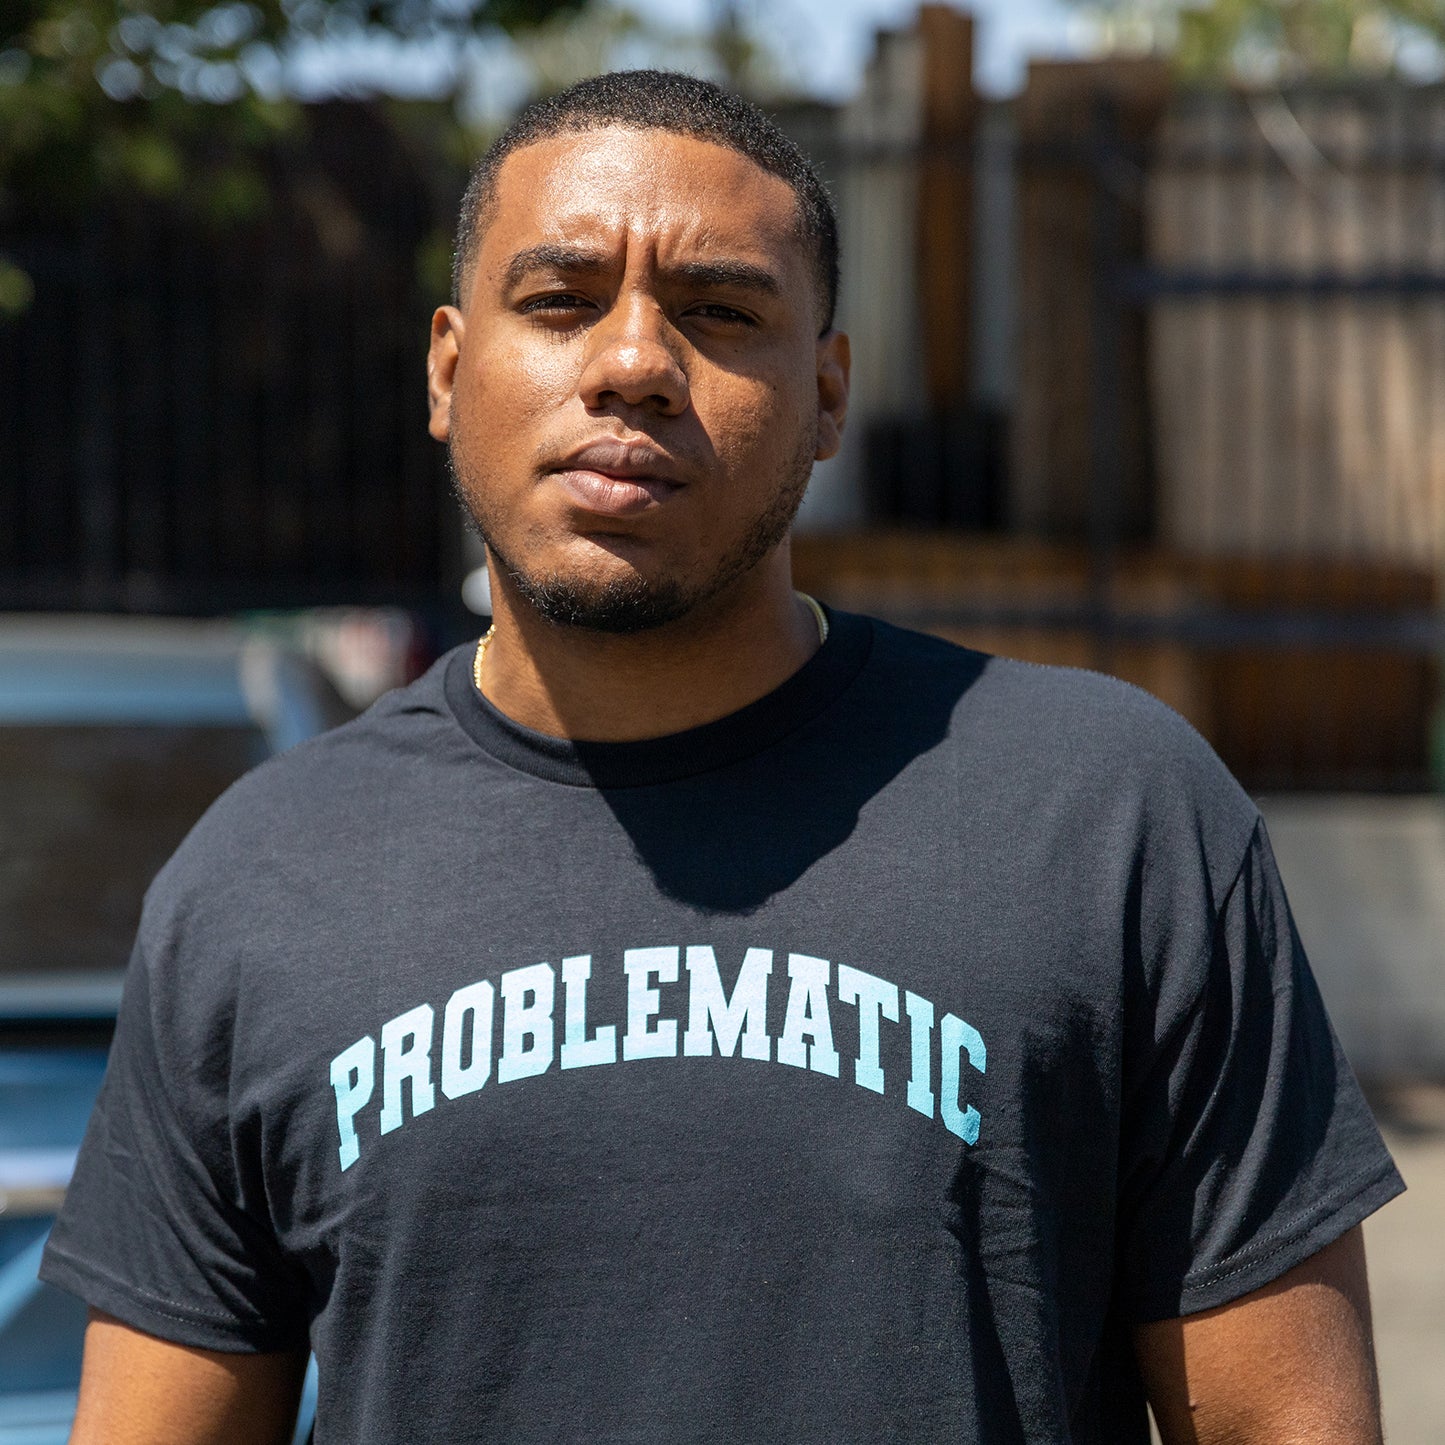 "Problematic" Shirt